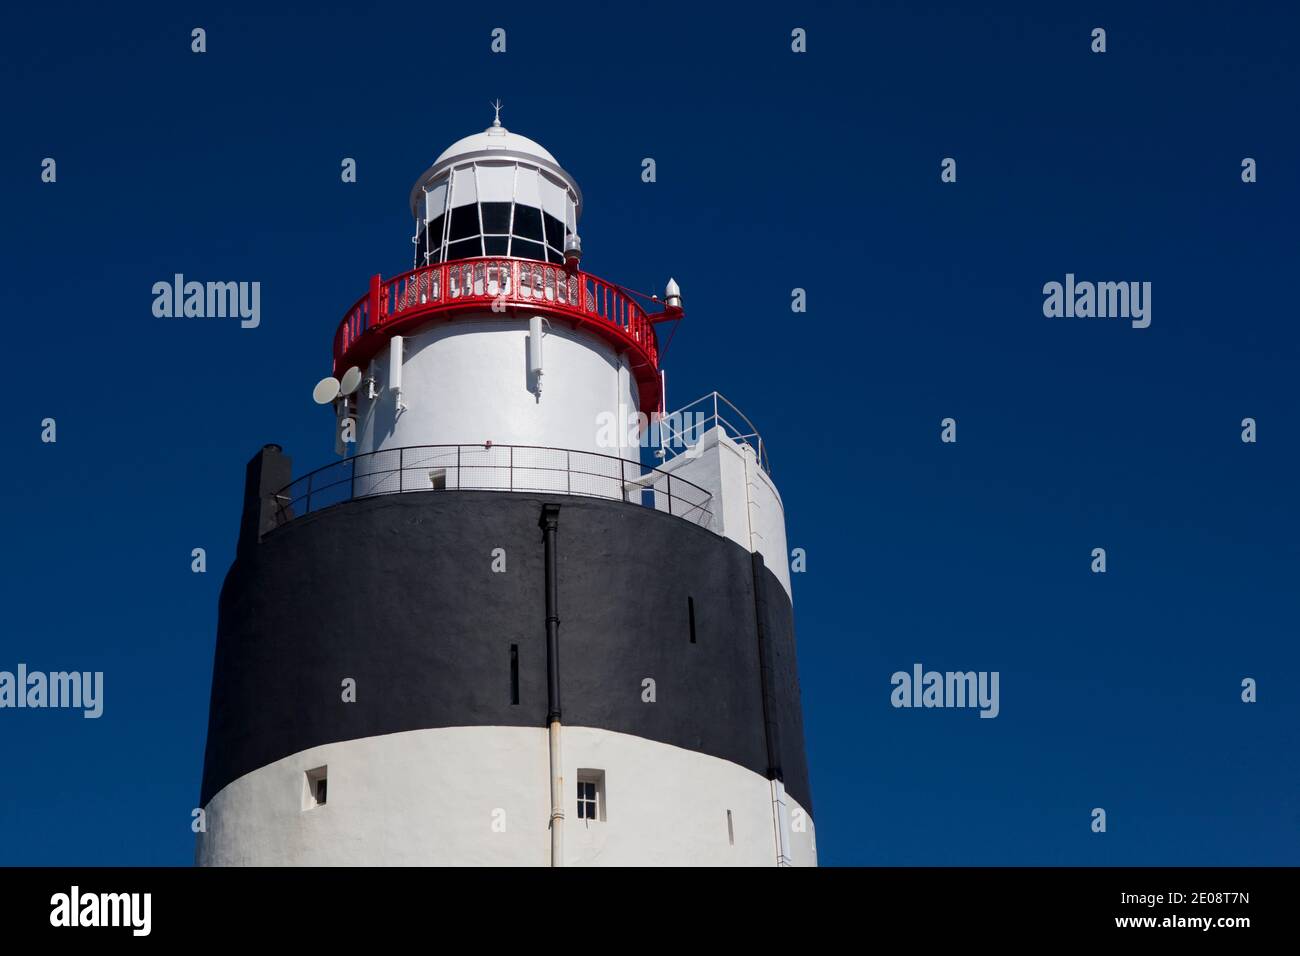 The Hook Lighthouse, Fethard on Sea, Wexford, Ireland is one of the oldest lighthouses in the world, and has been in use since the 12th or 13th centur Stock Photo